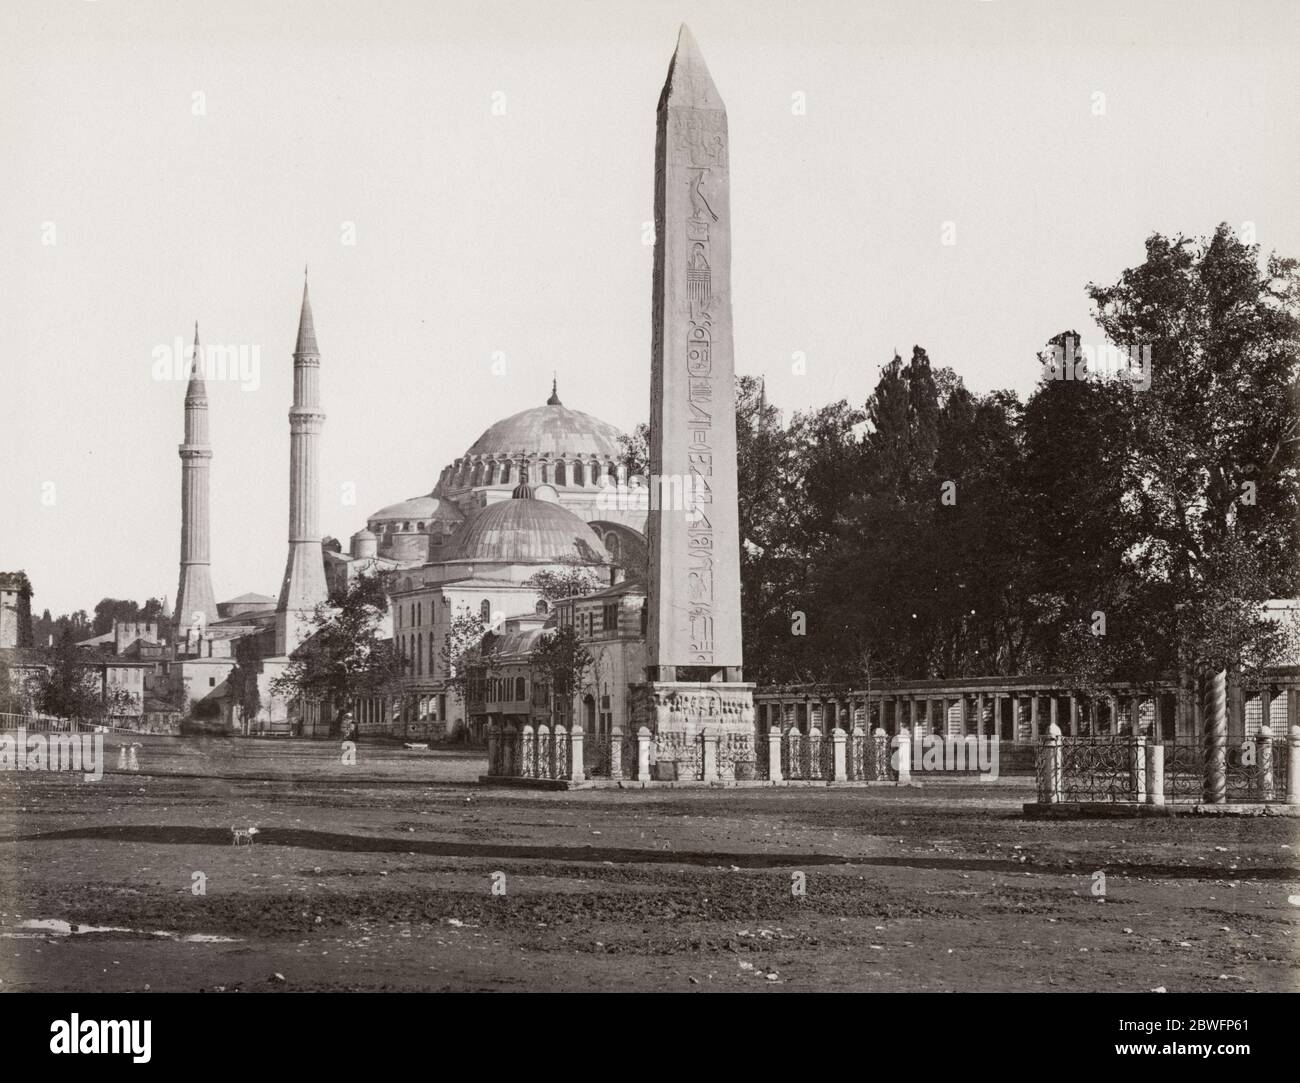 Vintage 19th century photograph - The Obelisk of Theodosius is the Ancient Egyptian obelisk of Pharaoh Thutmose III re-erected in the Hippodrome of Constantinople by the Roman emperor Theodosius I in the 4th century AD. Stock Photo